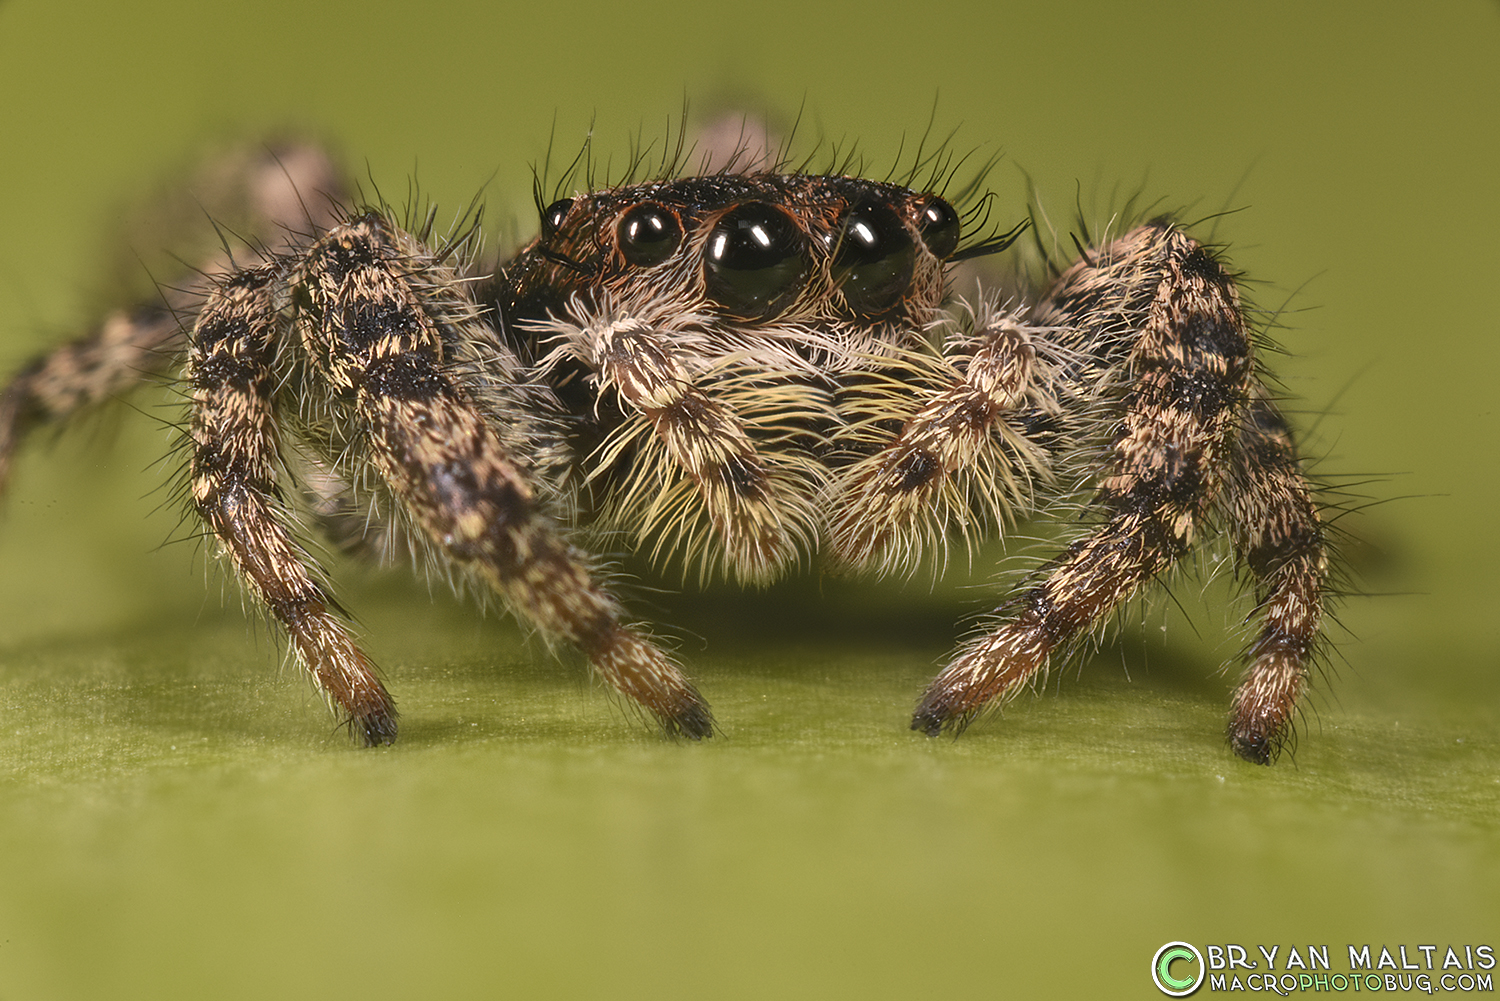 Jumping Spider Royal. Jumping Spiders reading answers. Jumping Spider view from above.